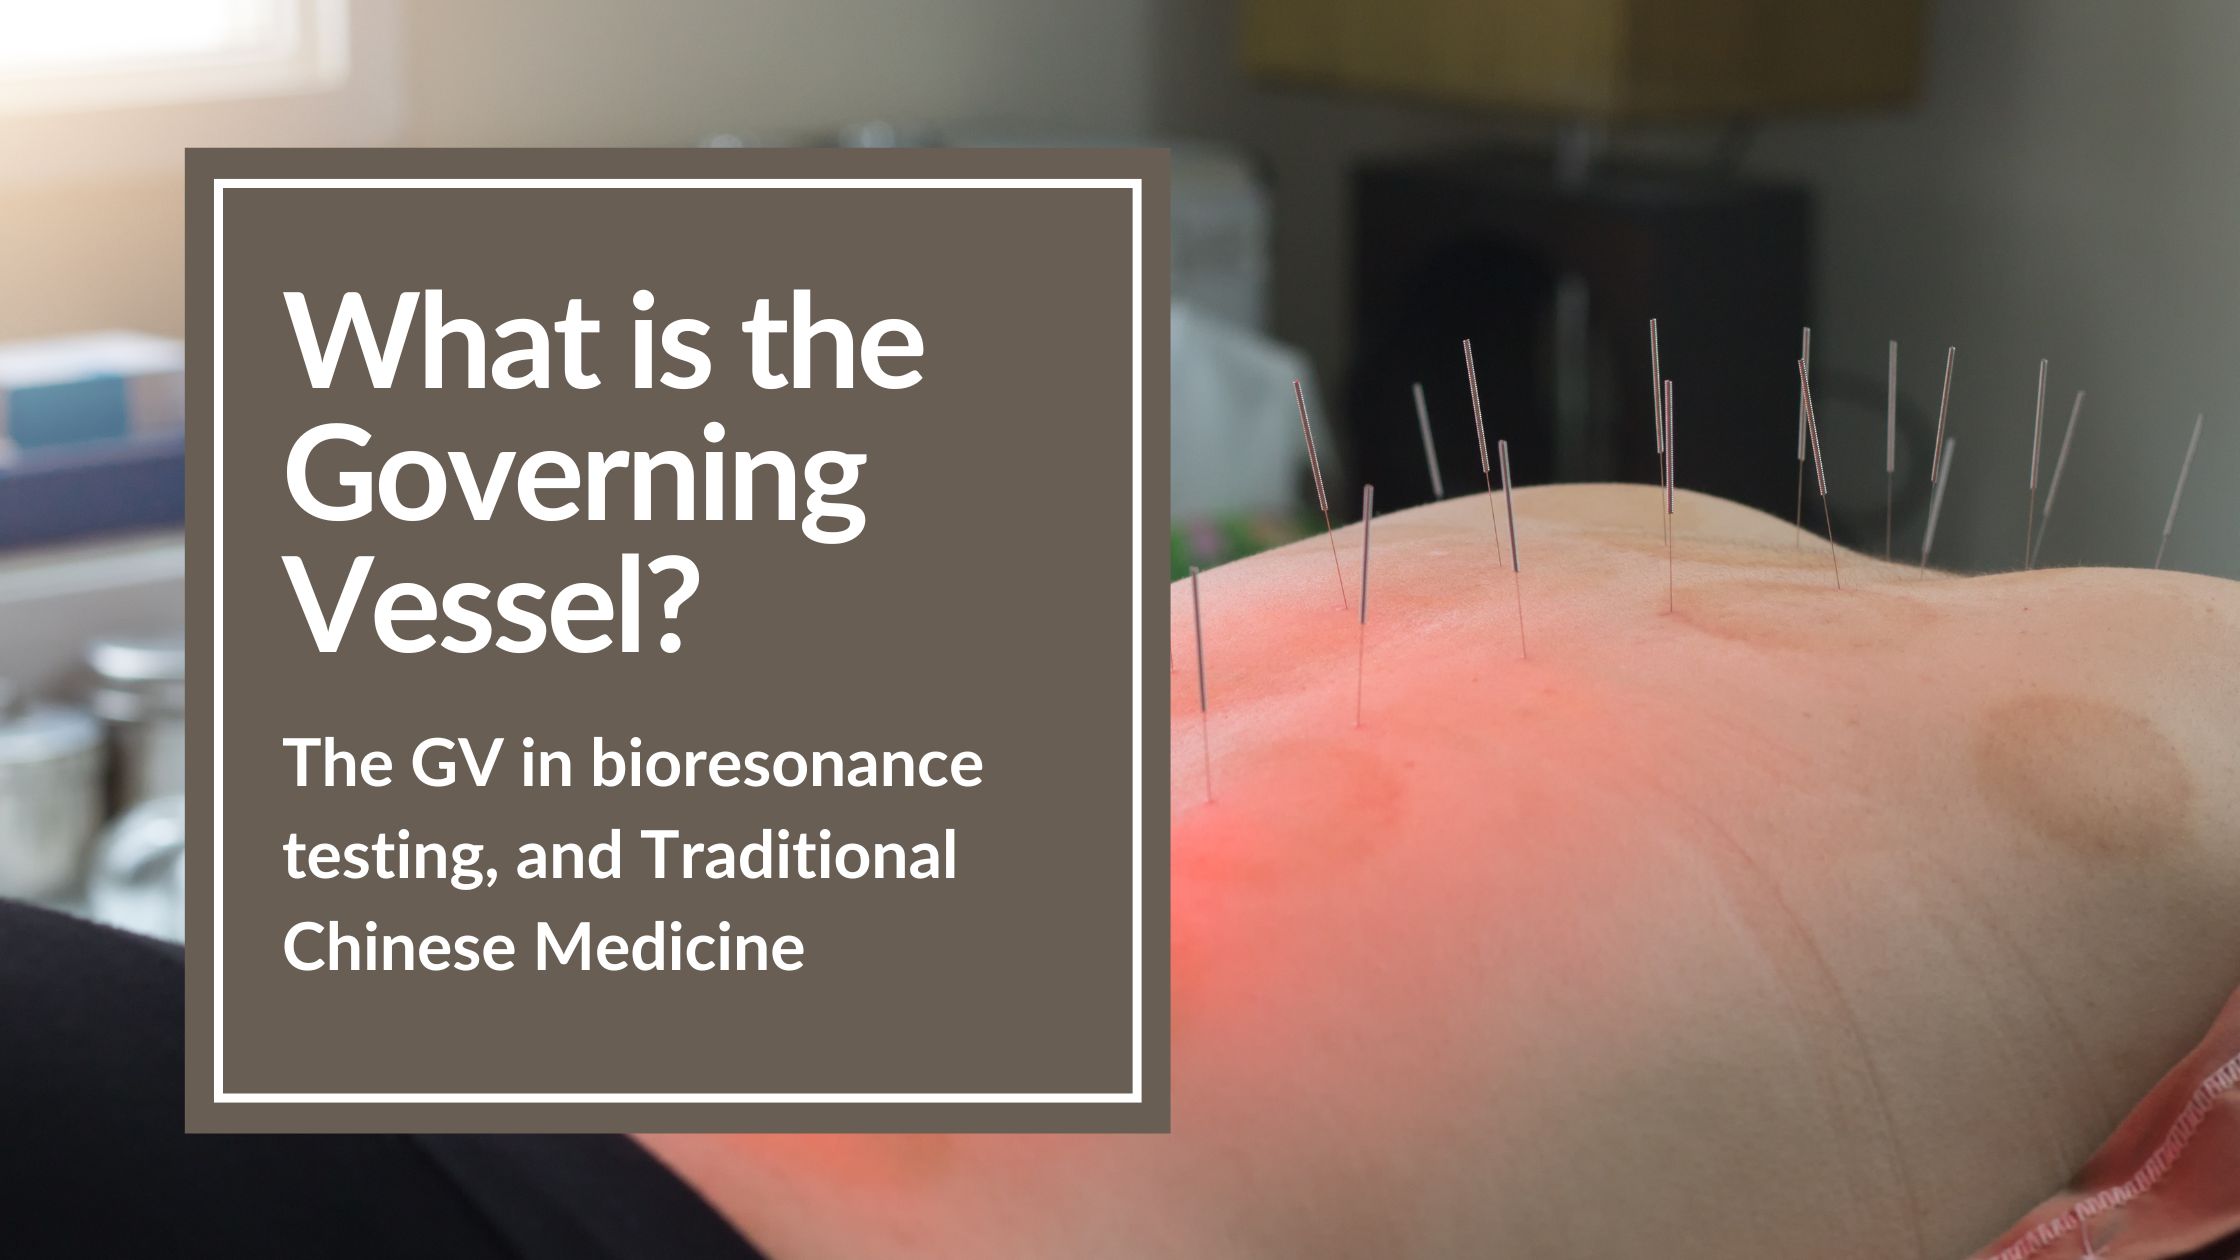 The GV in bioresonance testing, and Traditional Chinese Medicine